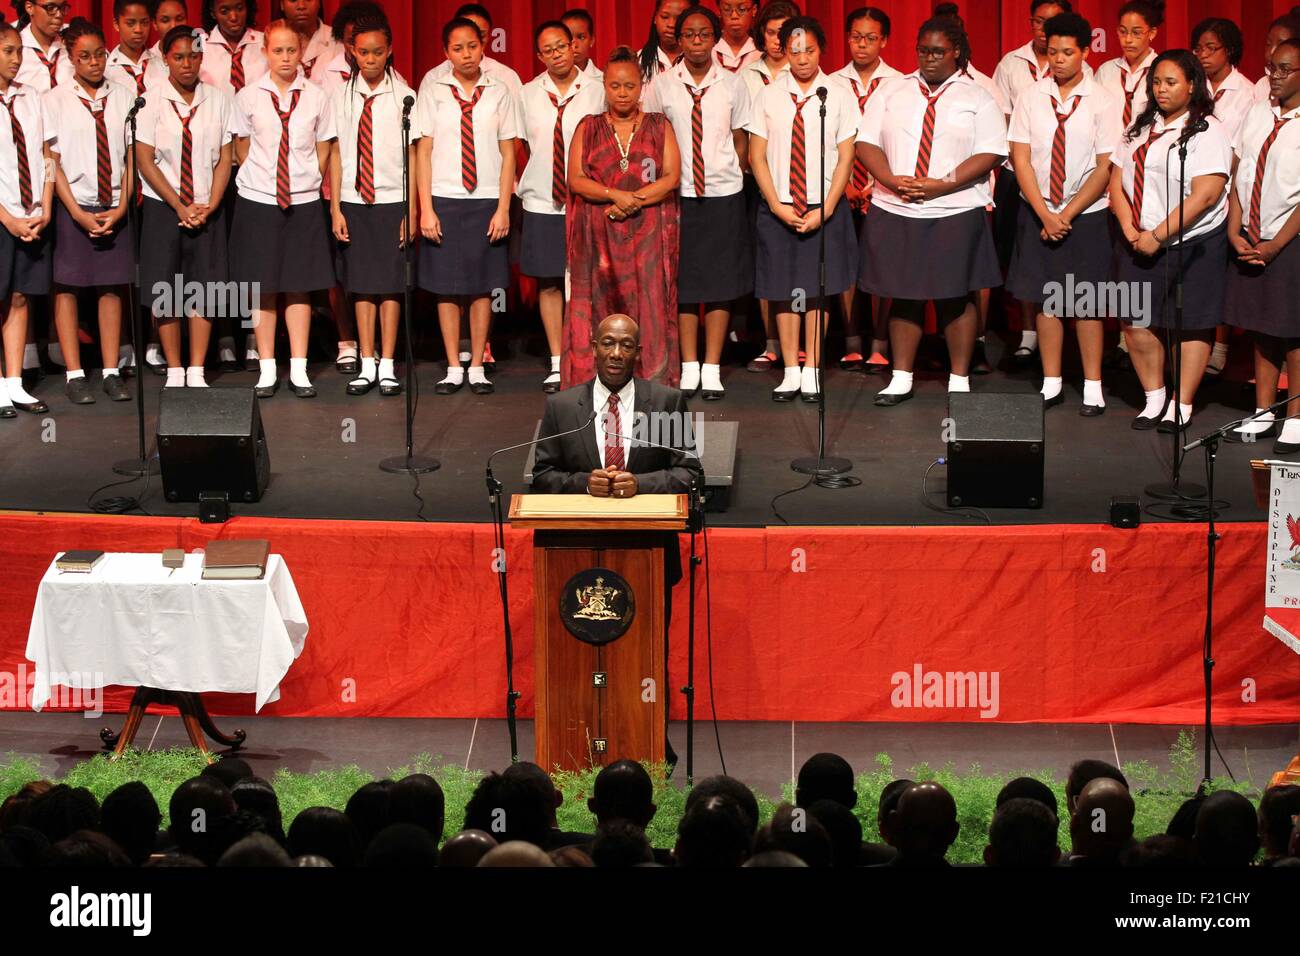 Port Of Spain, Trinidad and Tobago. 9th Sep, 2015. Trinidad and Tobago's People's National Movement (PNM) leader Keith Rowley(C, front), delivers a speech during his swearing-in ceremony as the country's new prime minister in Port of Spain, capital of Trinidad and Tobago, on Sept. 9, 2015. Trinidad and Tobago's People's National Movement (PNM) leader Keith Rowley was sworn in Wednesday as the country's new prime minister by President Anthony Carmona in a ceremony held here. © Gao Xing/Xinhua/Alamy Live News Stock Photo